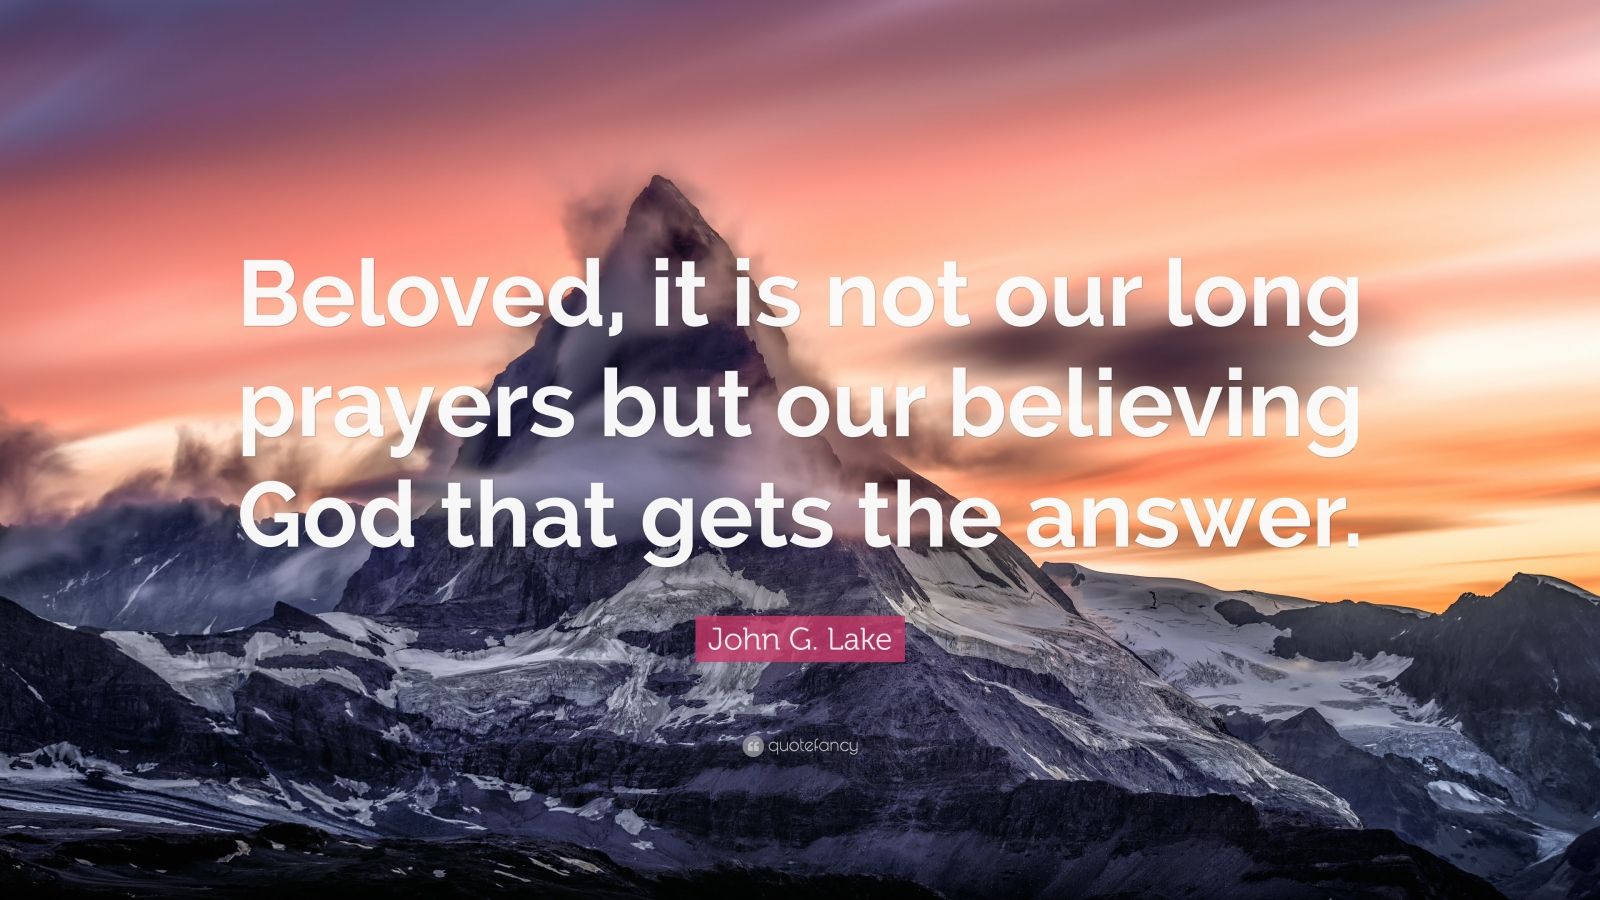 John G. Lake Quote: “Beloved, it is not our long prayers but our ...